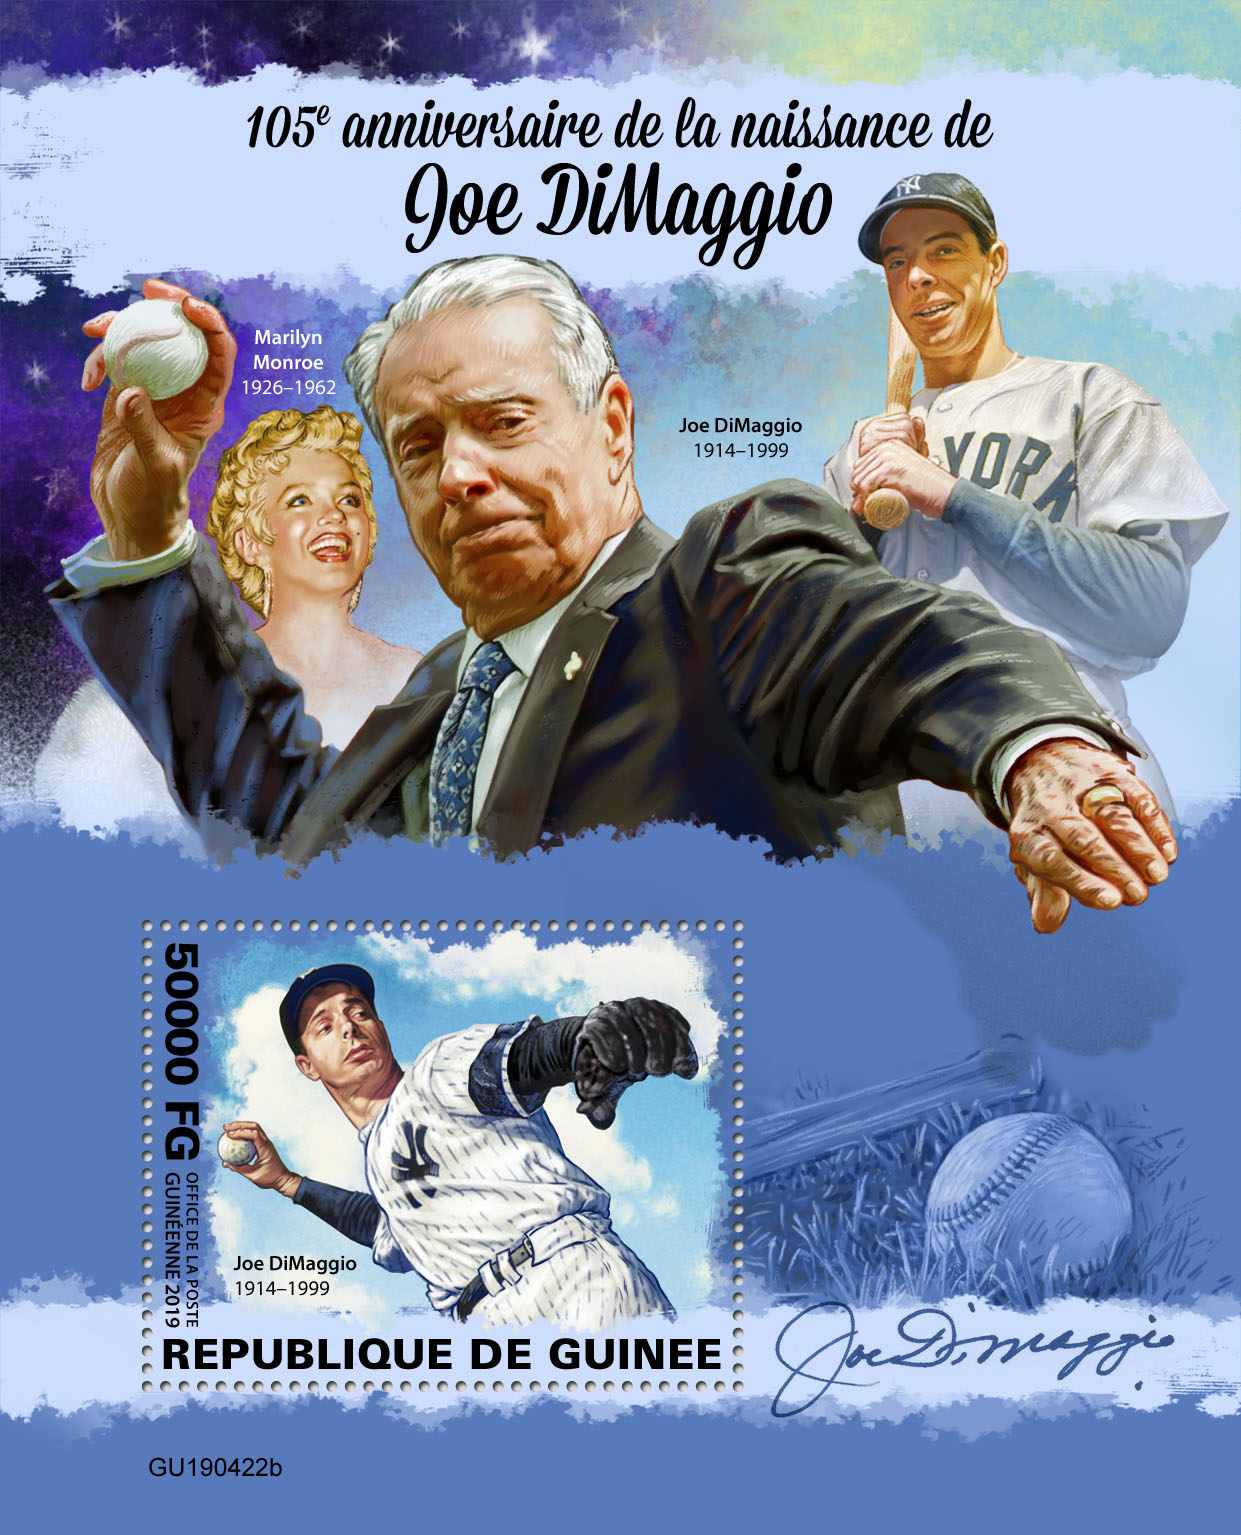 Joe DiMaggio - Issue of Guinée postage stamps